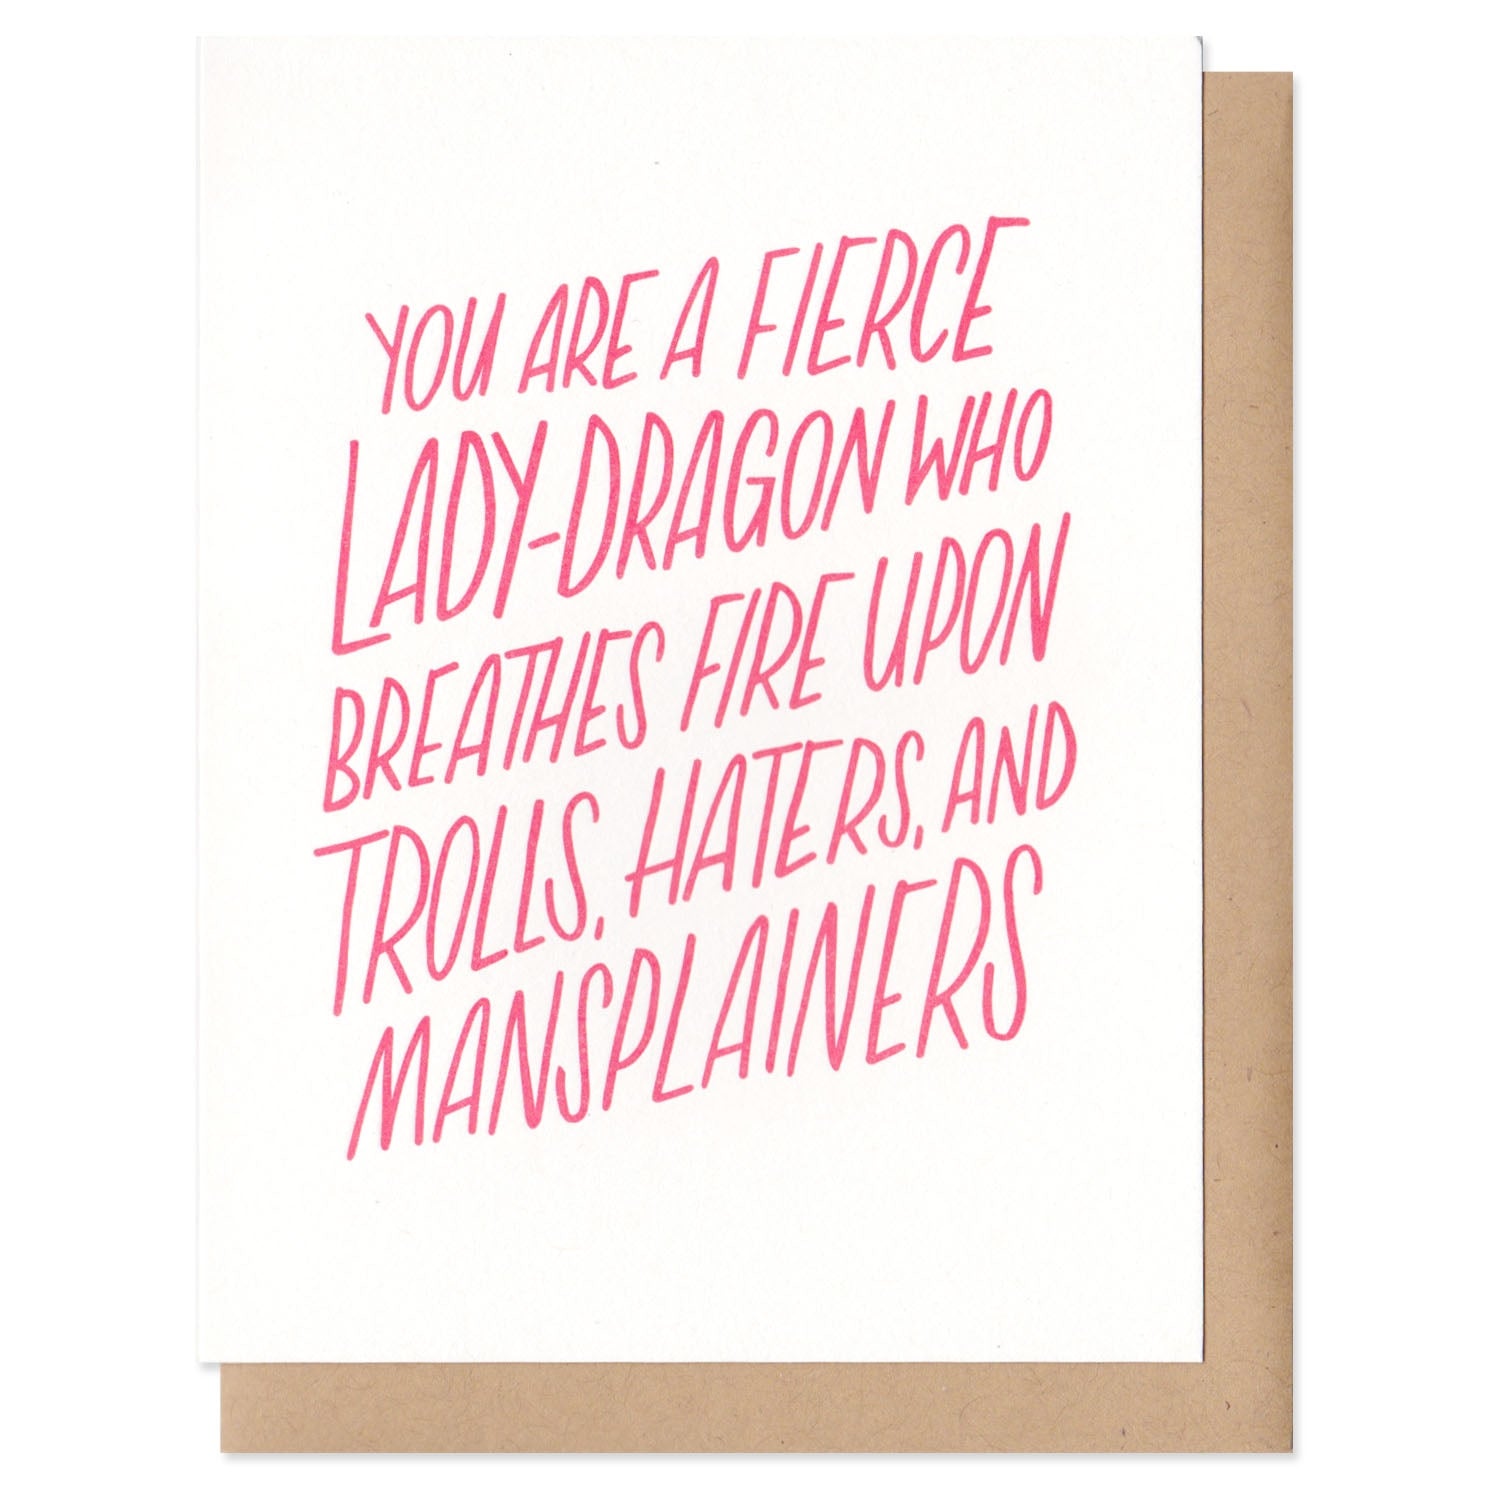 Frog & Toad Press You Are a Fierce Lady Dragon Card